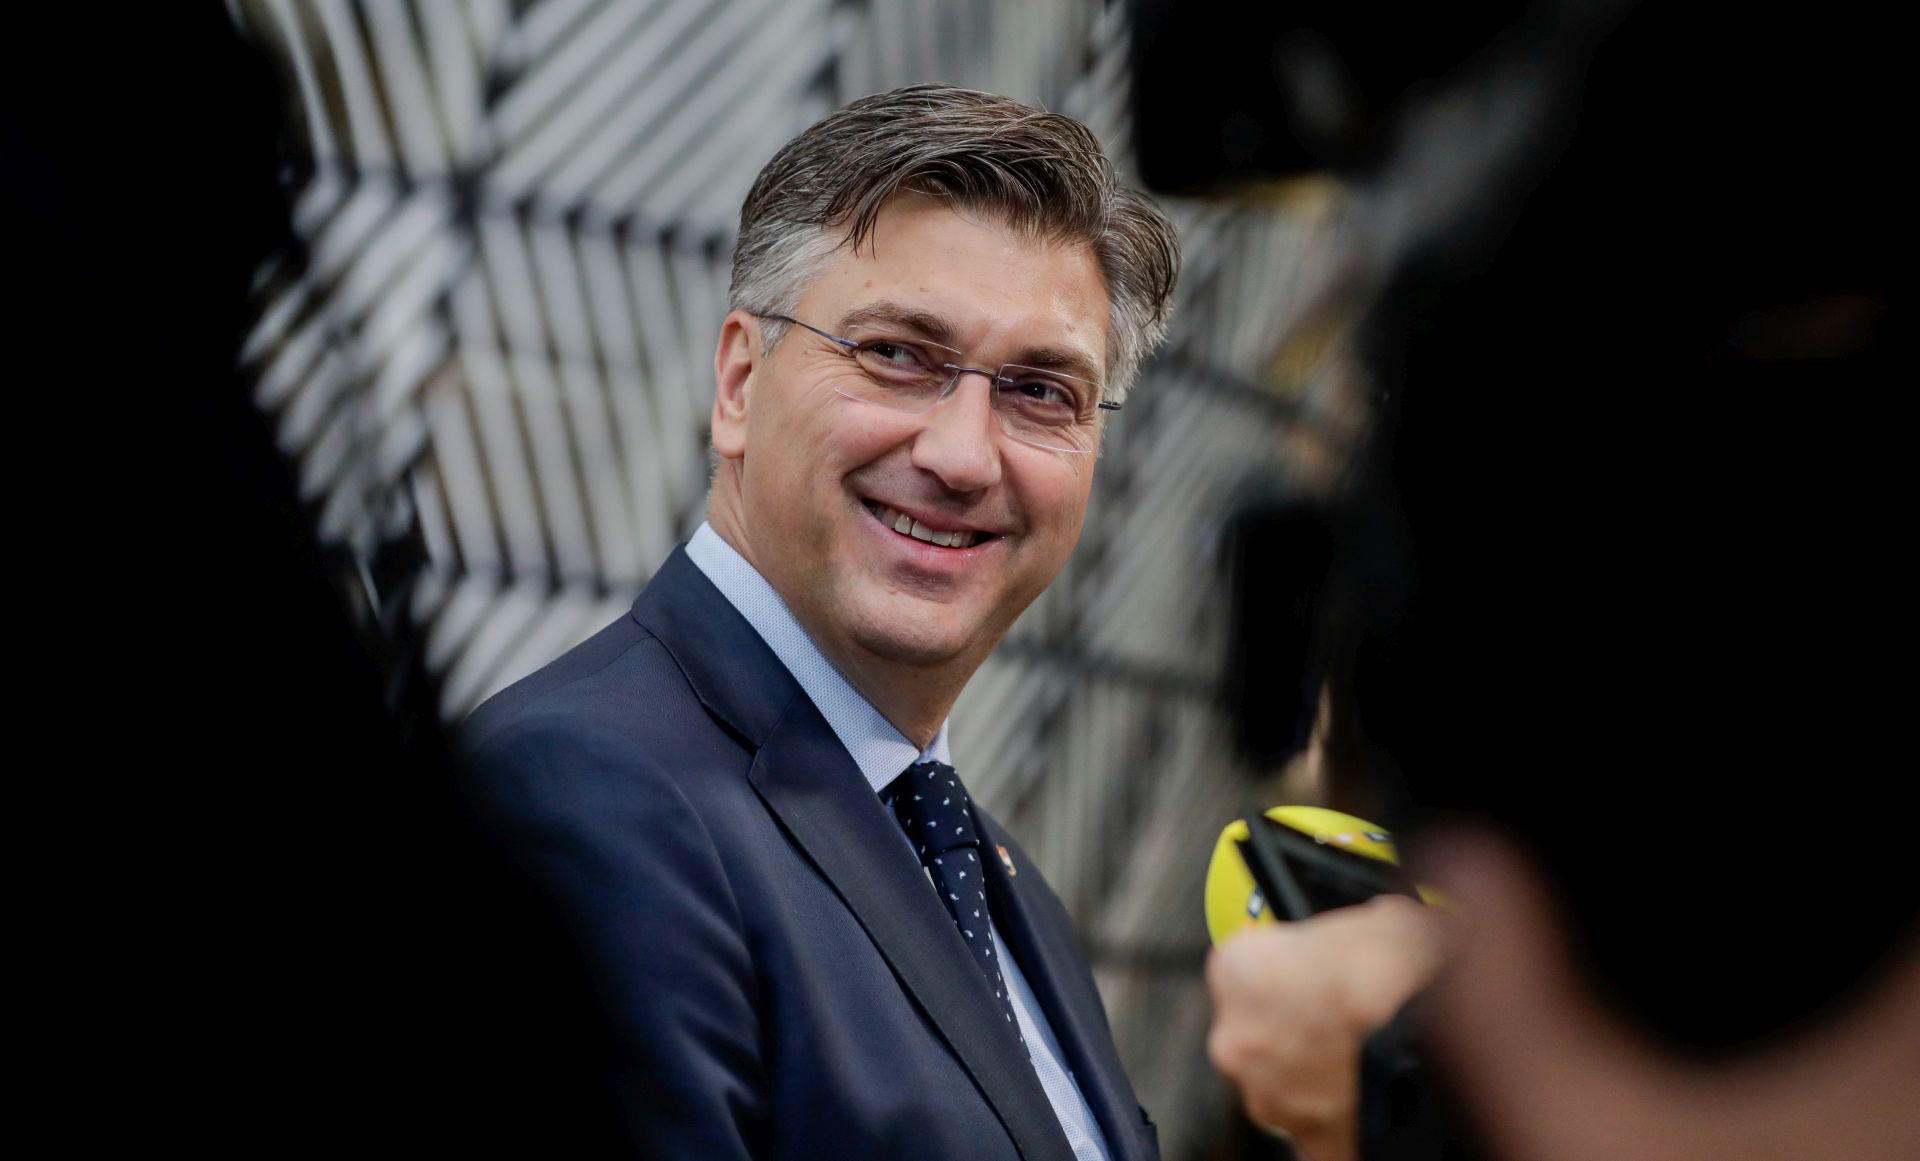 epa07929515 Croatian Prime Minister Andrej Plenkovic  arrives at the second day of a European Summit at the European Council in Brussels, Belgium, 18 October 2019.  The European Union (EU) and the British government have reached a tentative Brexit deal that still must be ratified.  EPA/STEPHANIE LECOCQ